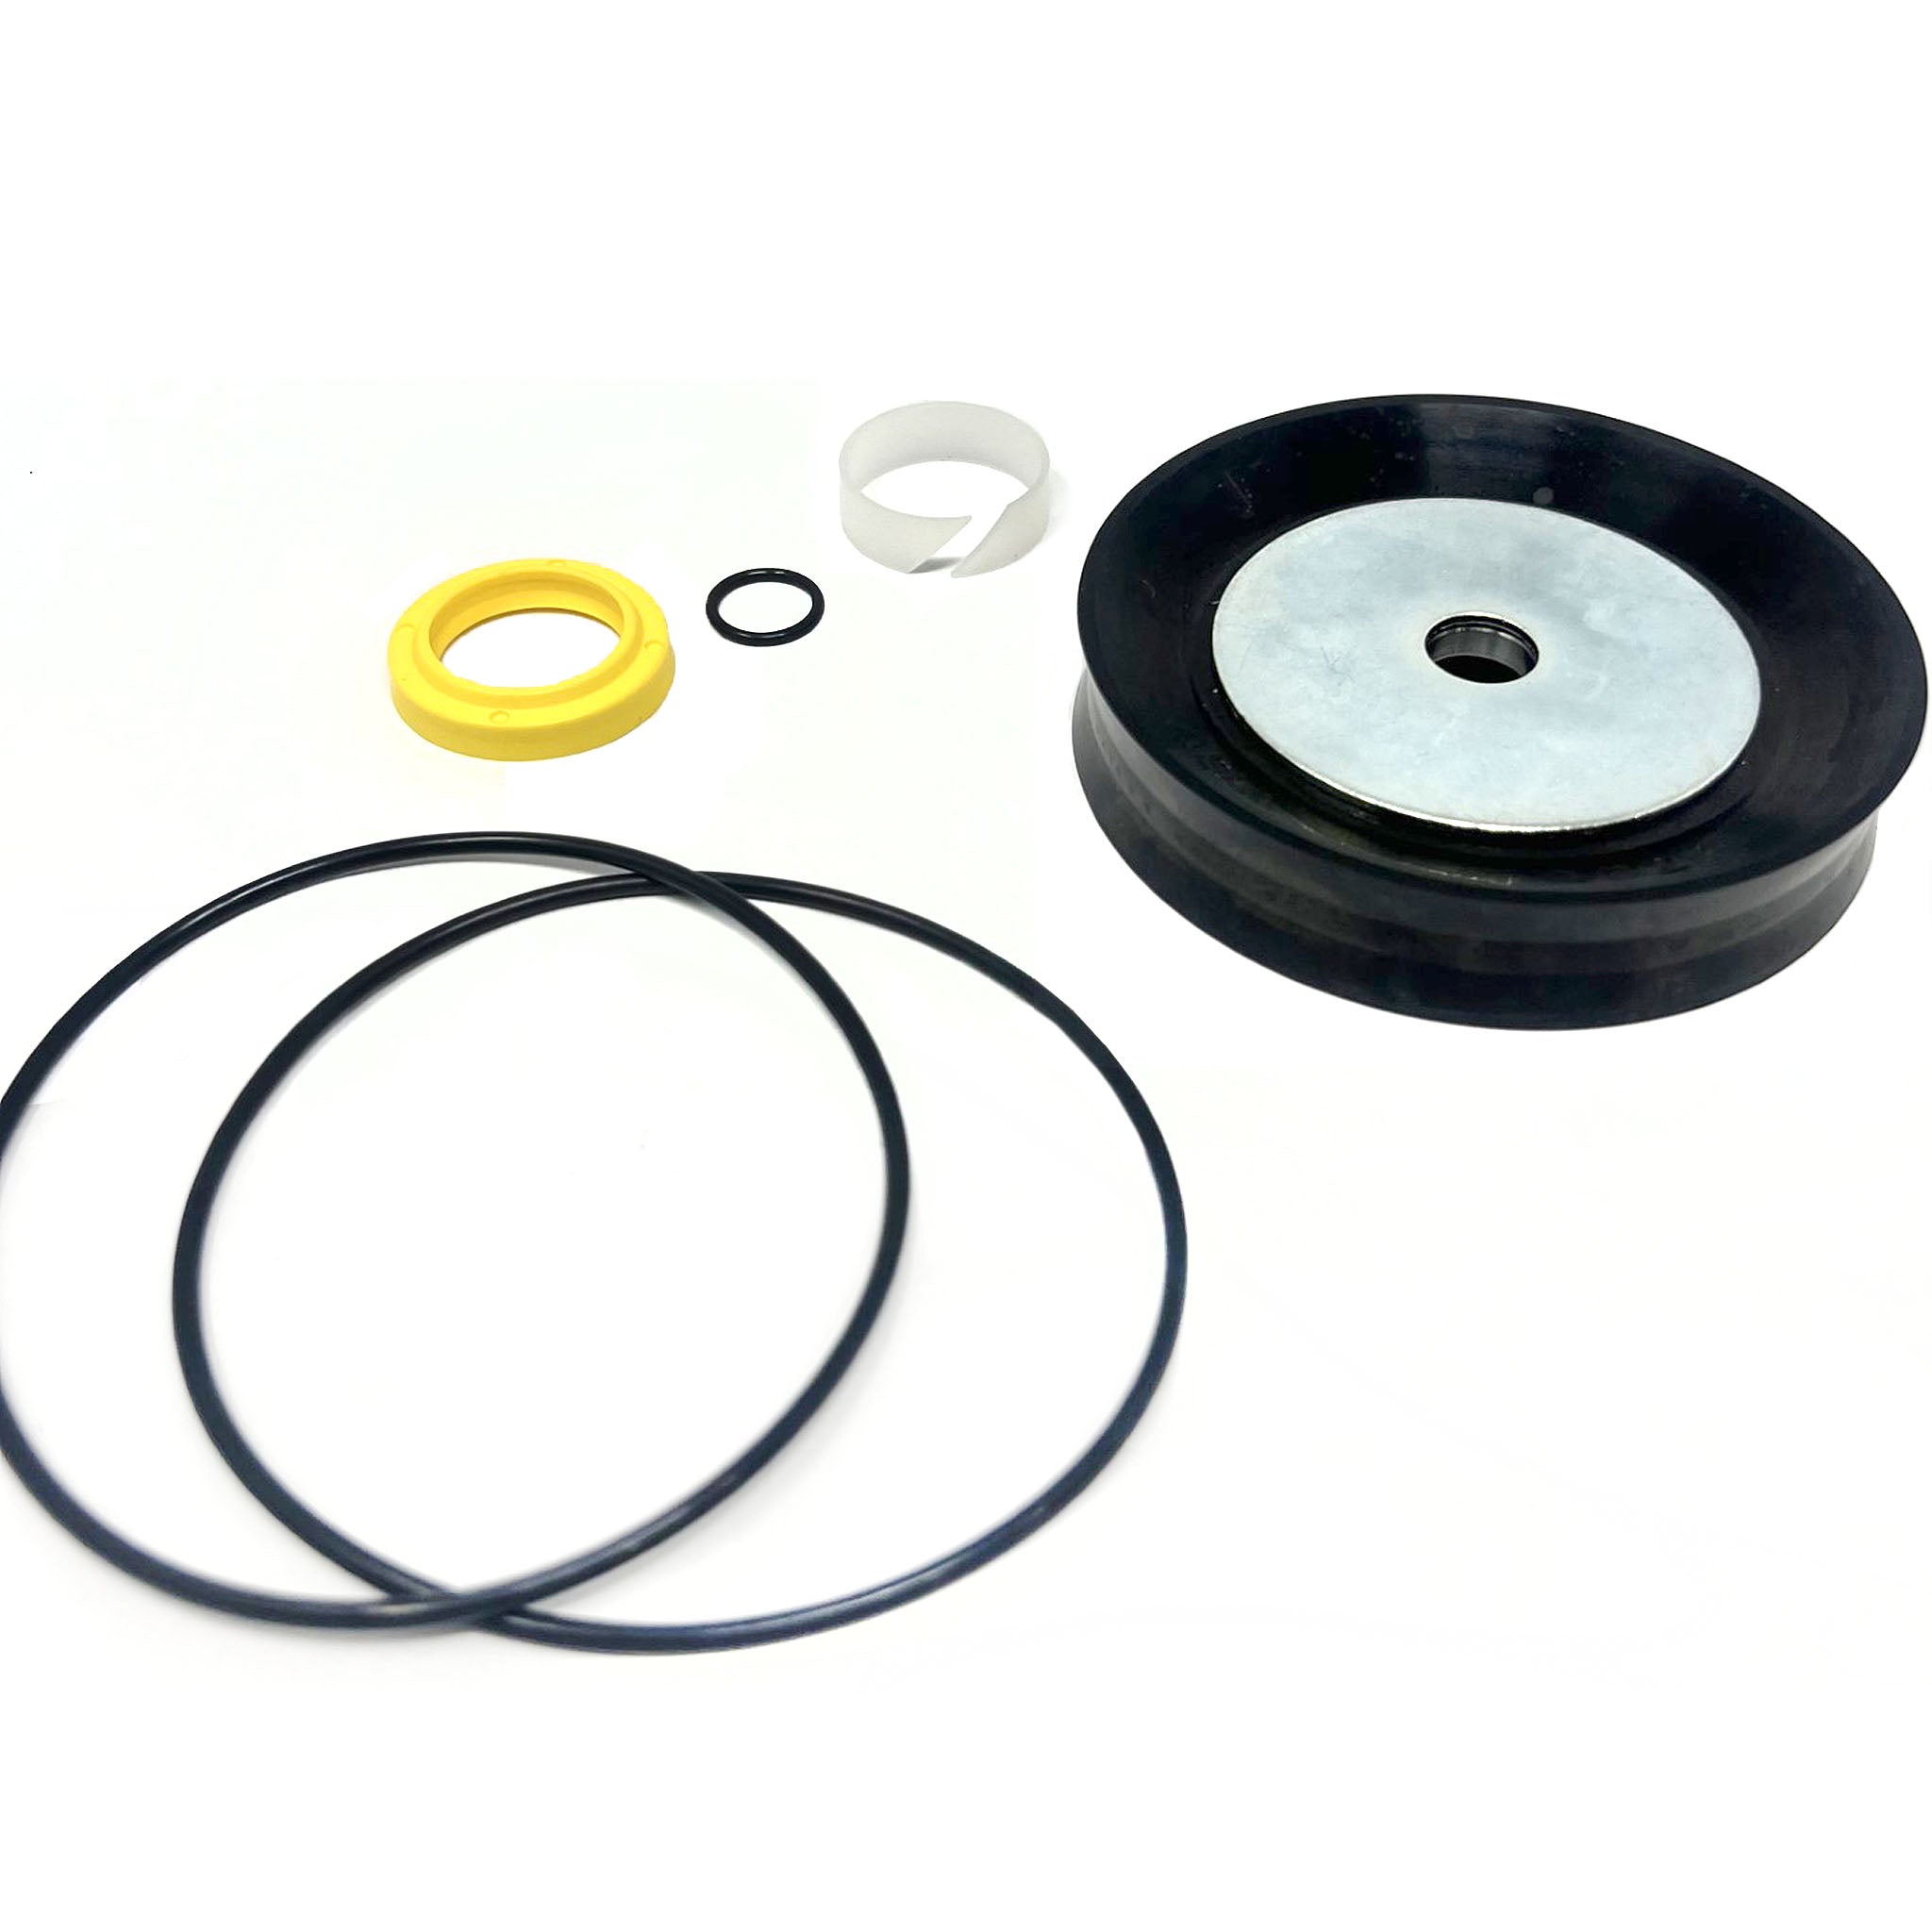 Table Top Cylinder Seal Kit with yellow seal for Coats 5030, 5060 or 5070